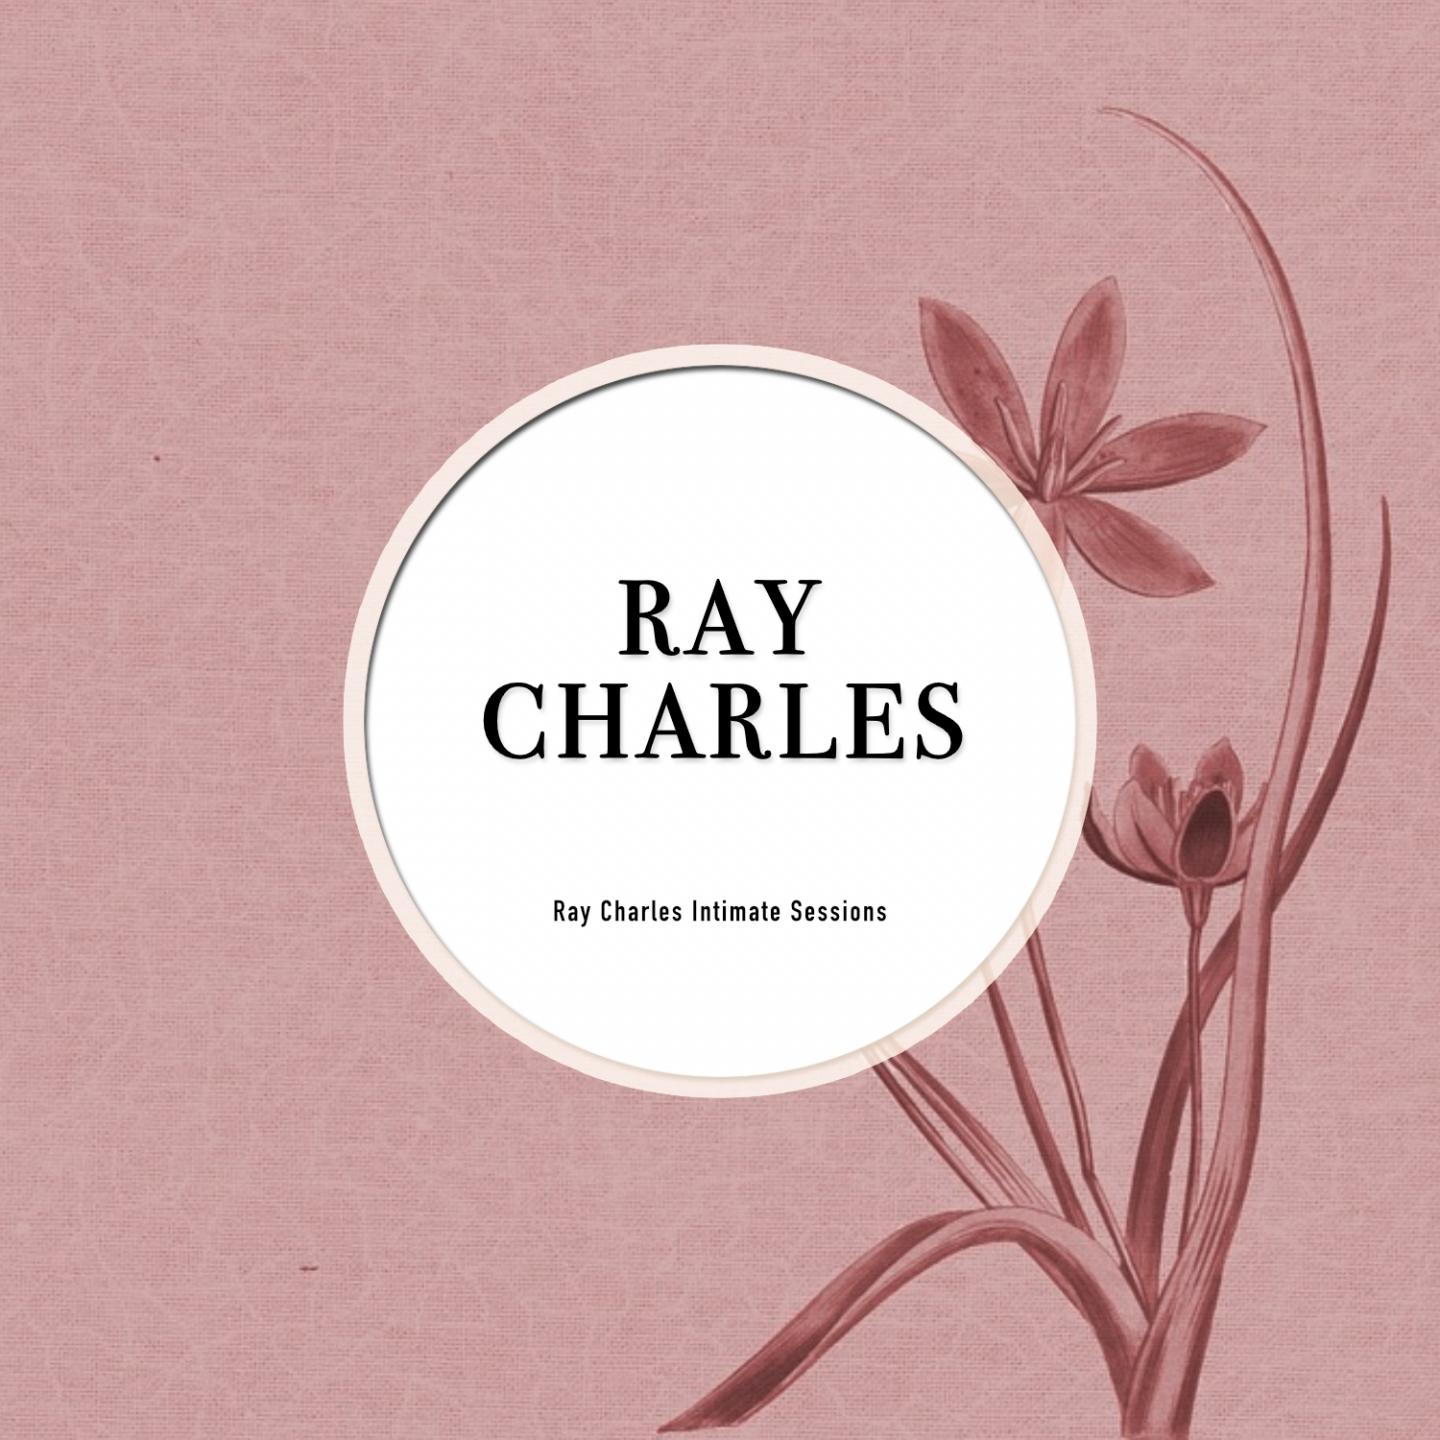 Ray Charles Initmate Sessions